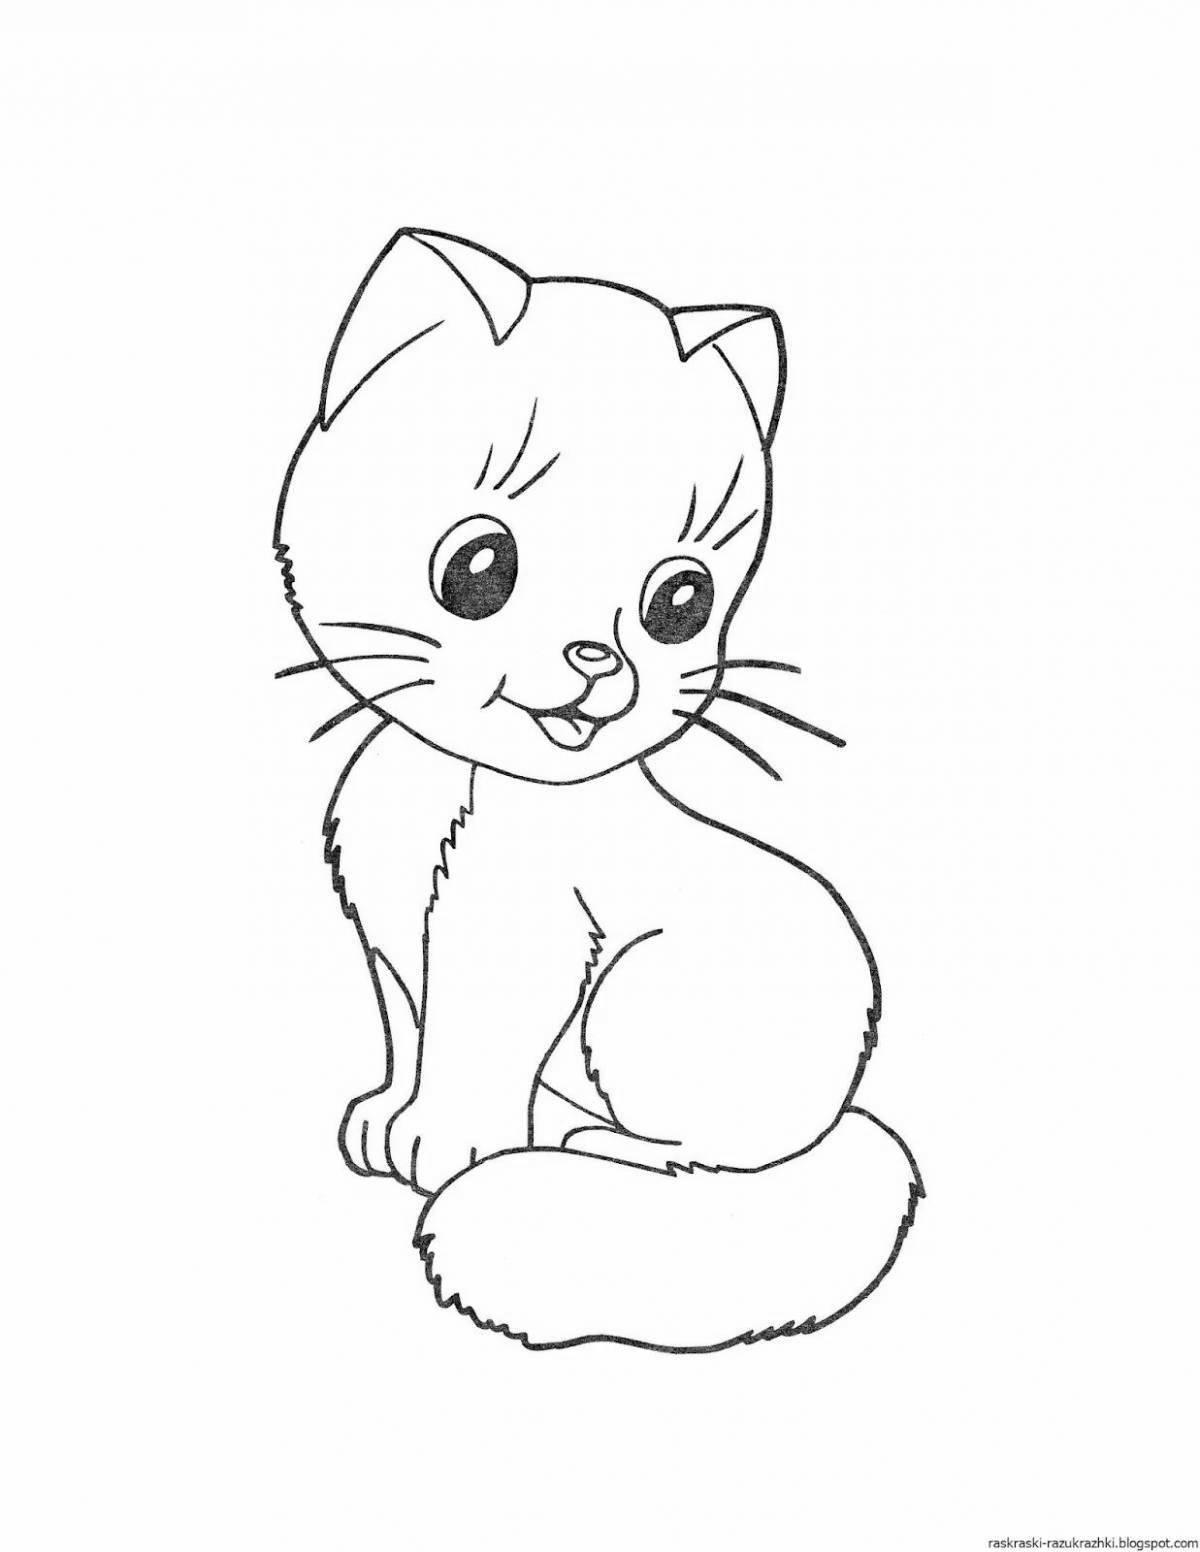 Coloring book funny cat for children 2-3 years old